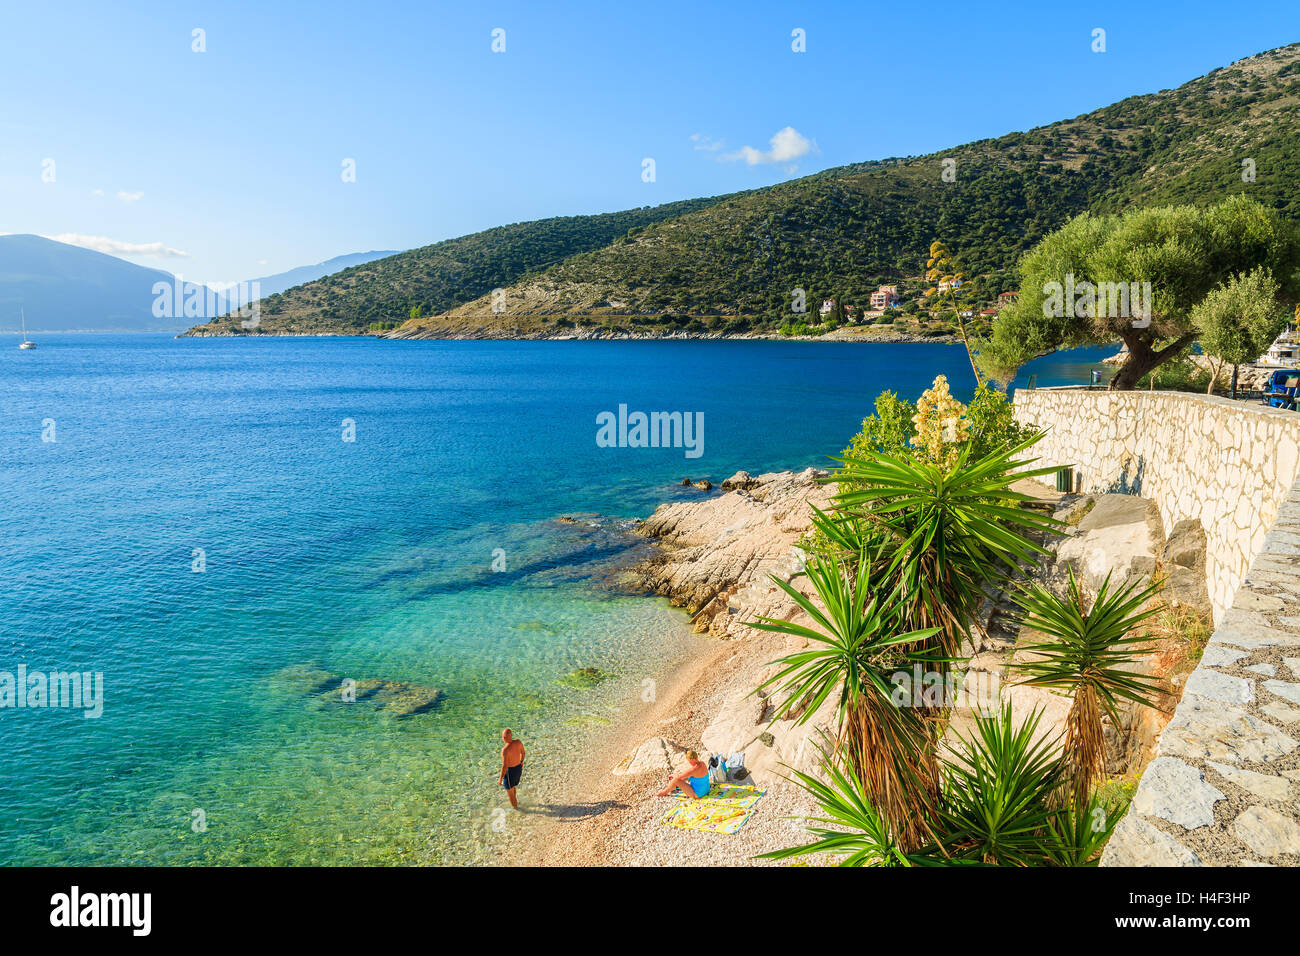 Unidentified couple of people relaxing on beach on coast of Kefalonia island in Agia Efimia, Greece Stock Photo